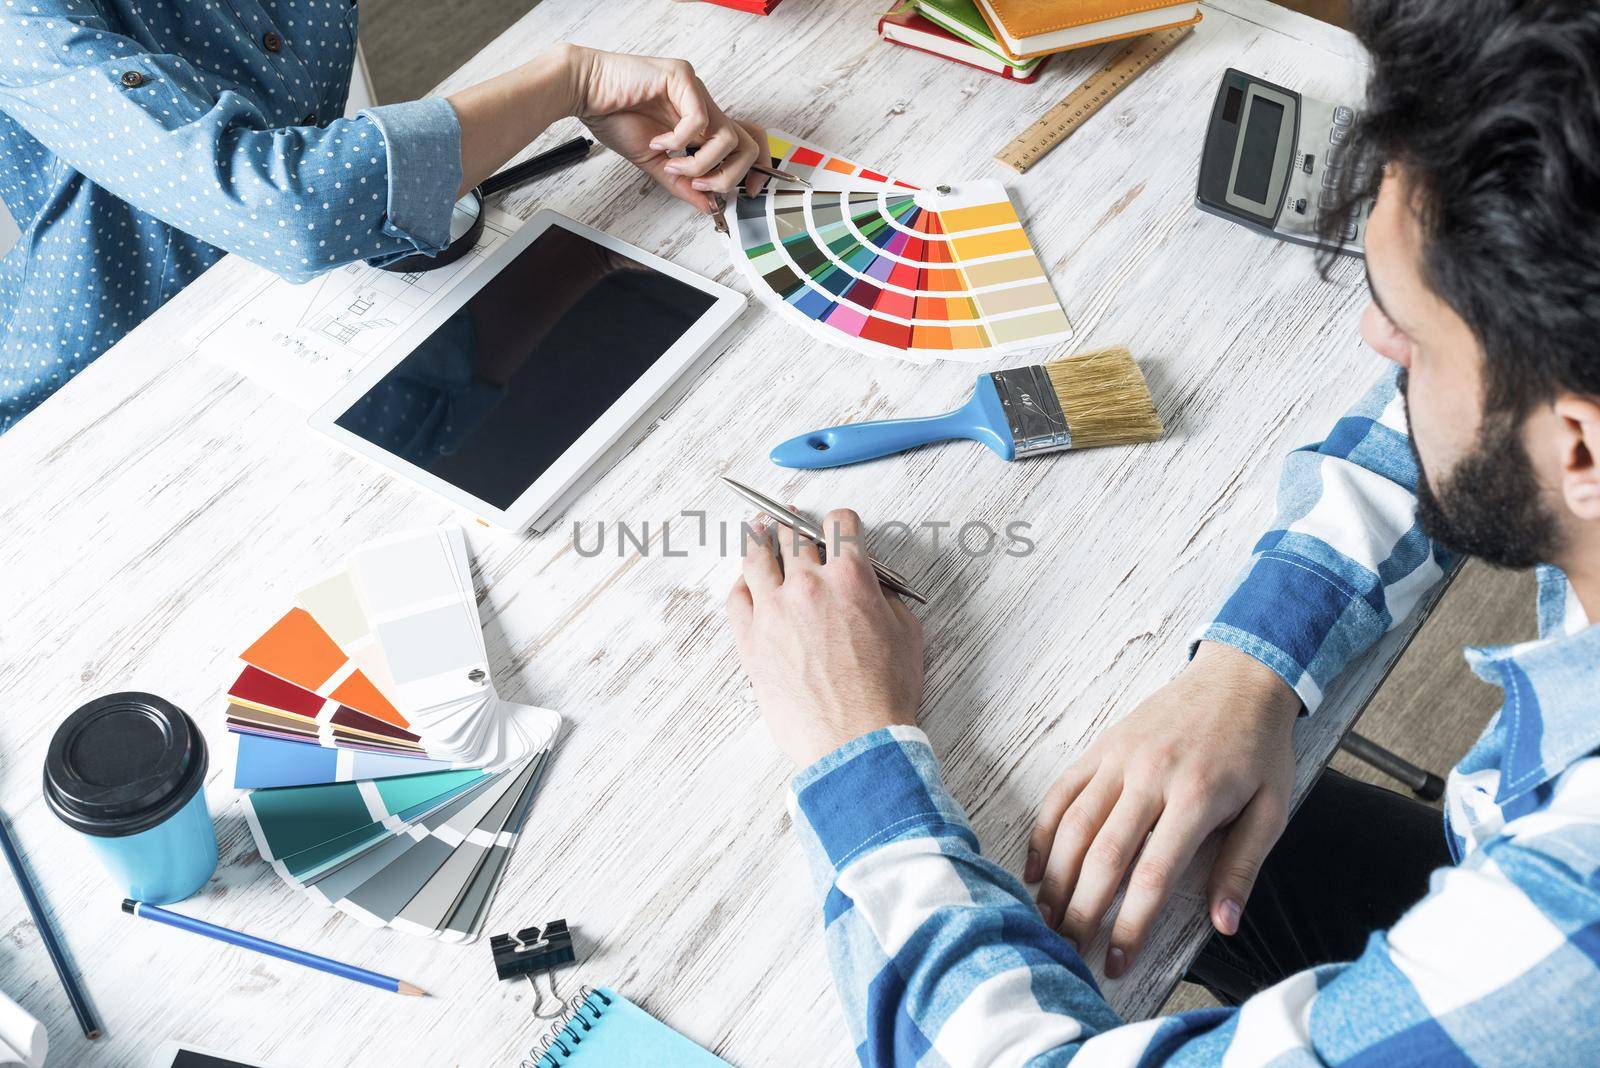 Web designers choosing colors from swatches at desk. Office workplace with tablet computer and color samples. Designing user interface of mobile application. Coloristics and professional visual design